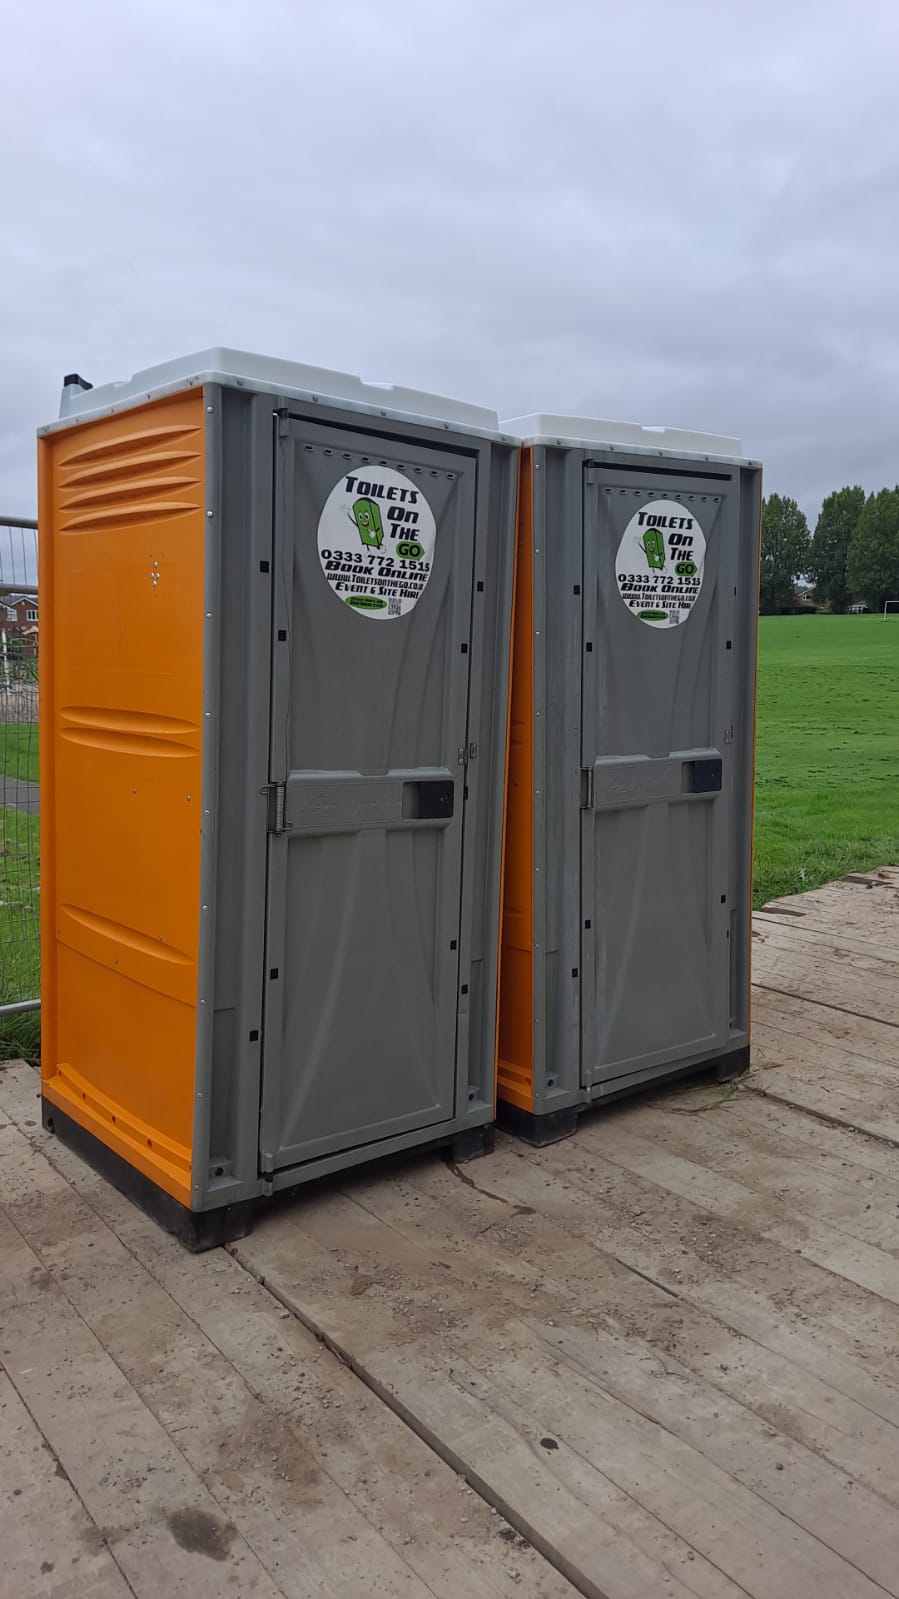 Gallery | Portable Toilet Loo Hire Rental Company in North West uk and Manchester gallery image 63